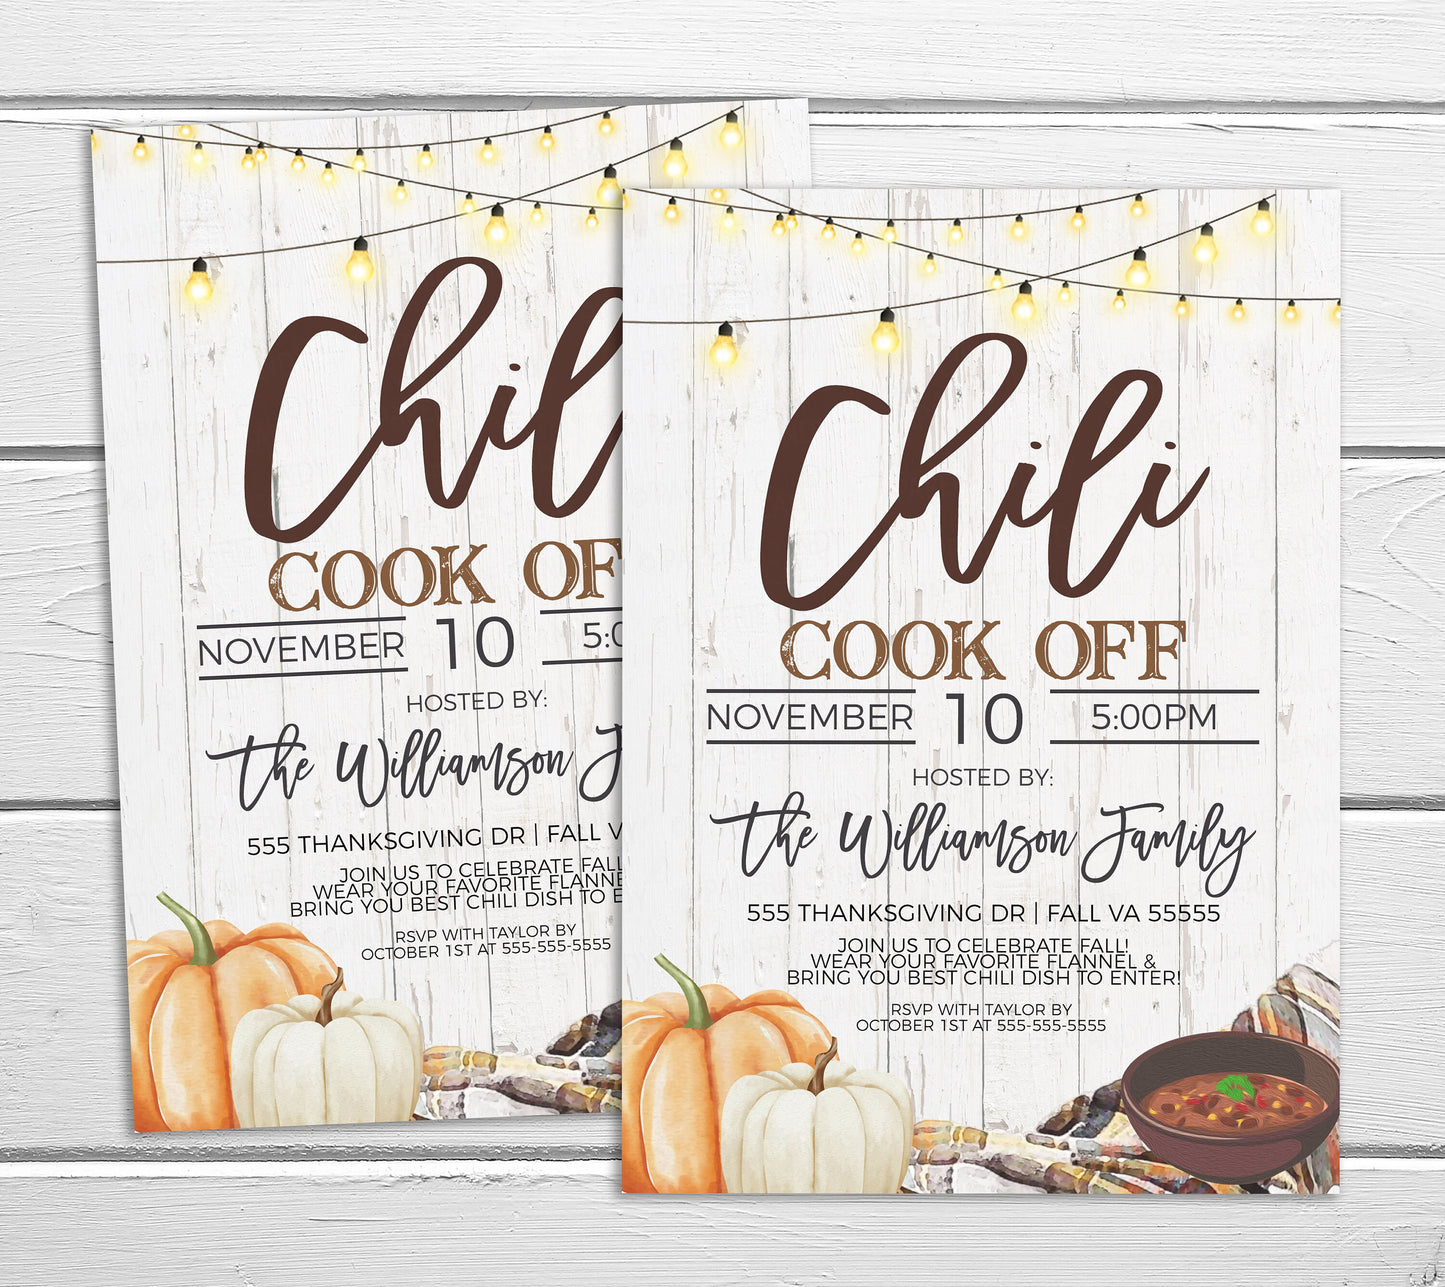 Fall Chili Cook Off Invitation, Chili Cook-off Tasting Competition Invite, Rustic Autumn Chili CookOff Party, Printable Editable Template